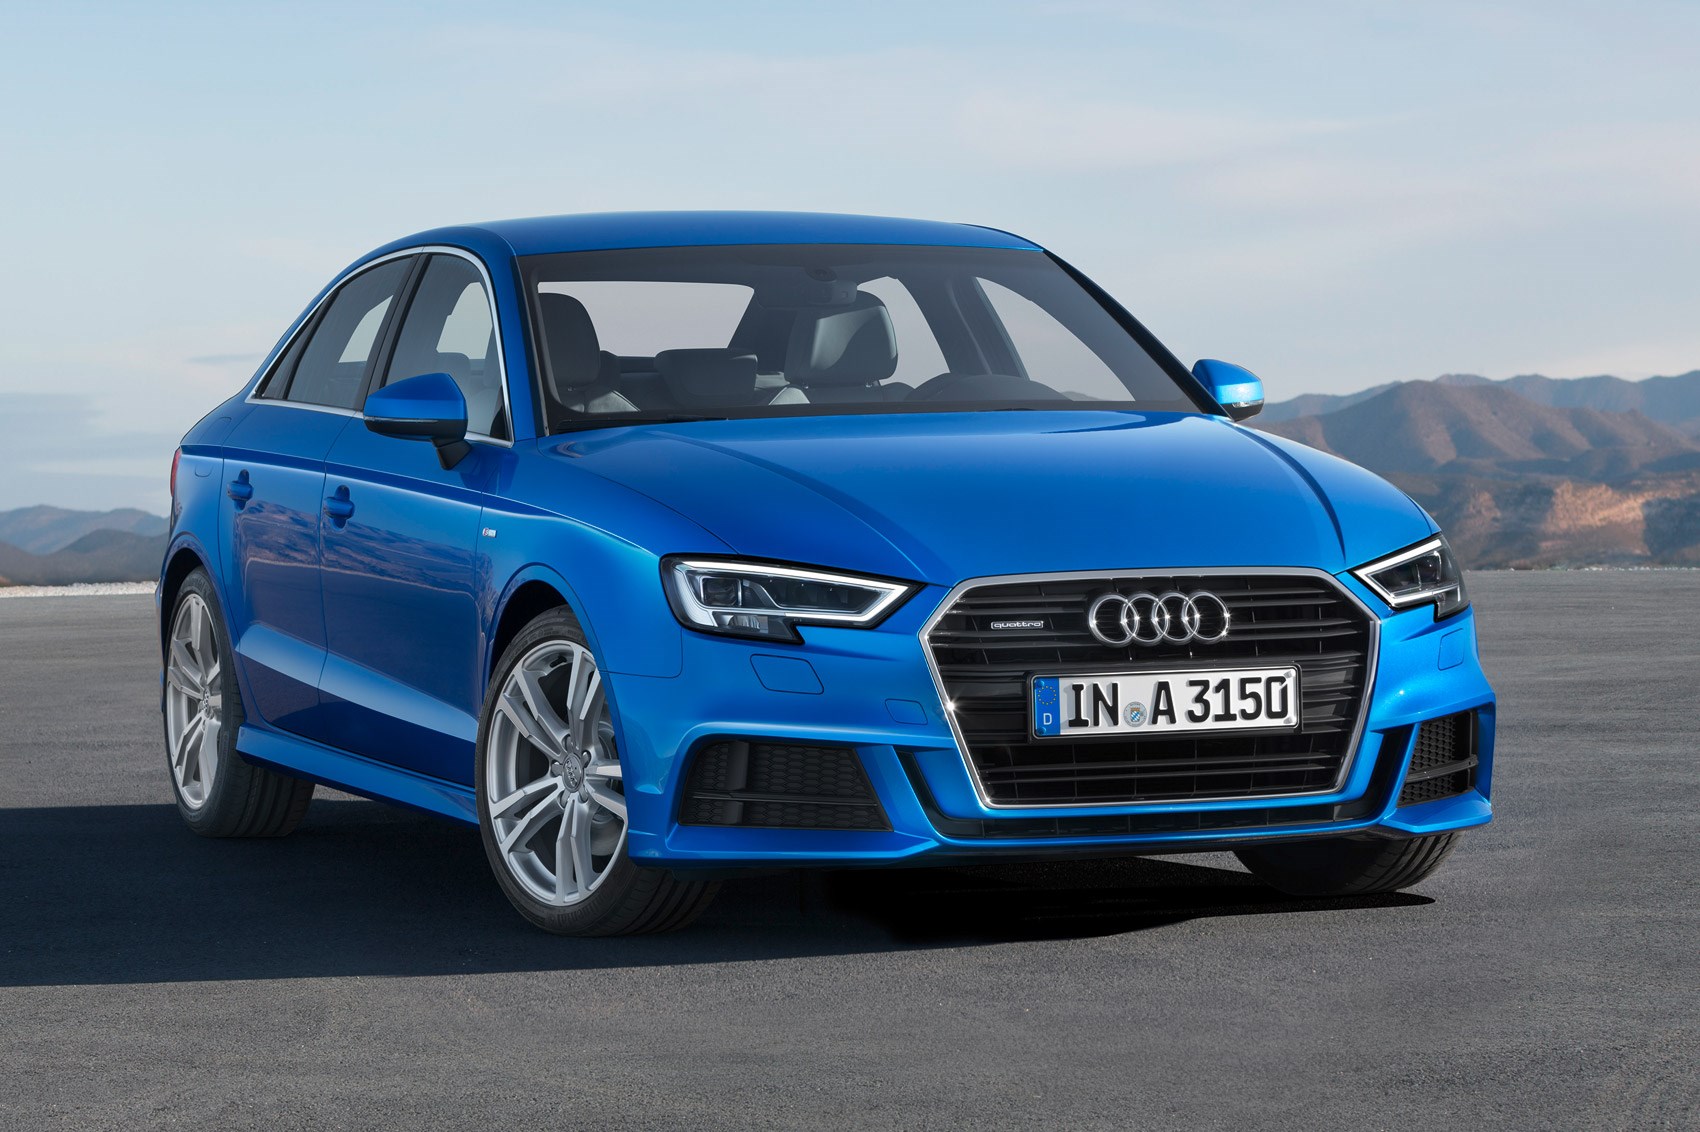 Hire A Audi A3 For An Hour In Dubai 